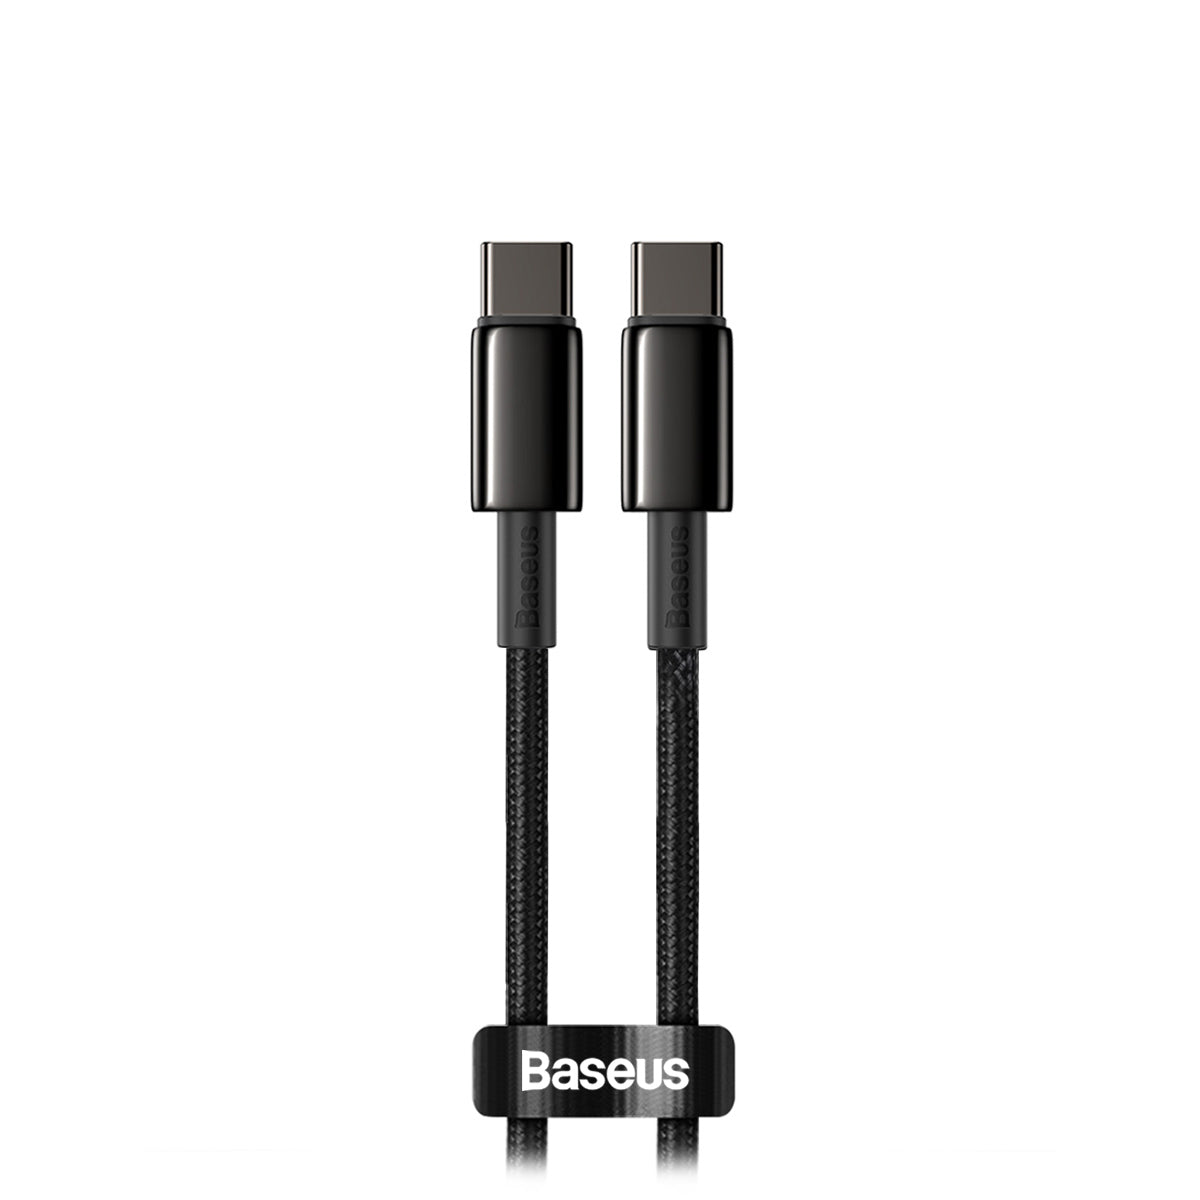 Baseus 100W USB-C PD Cable with Power LED Display